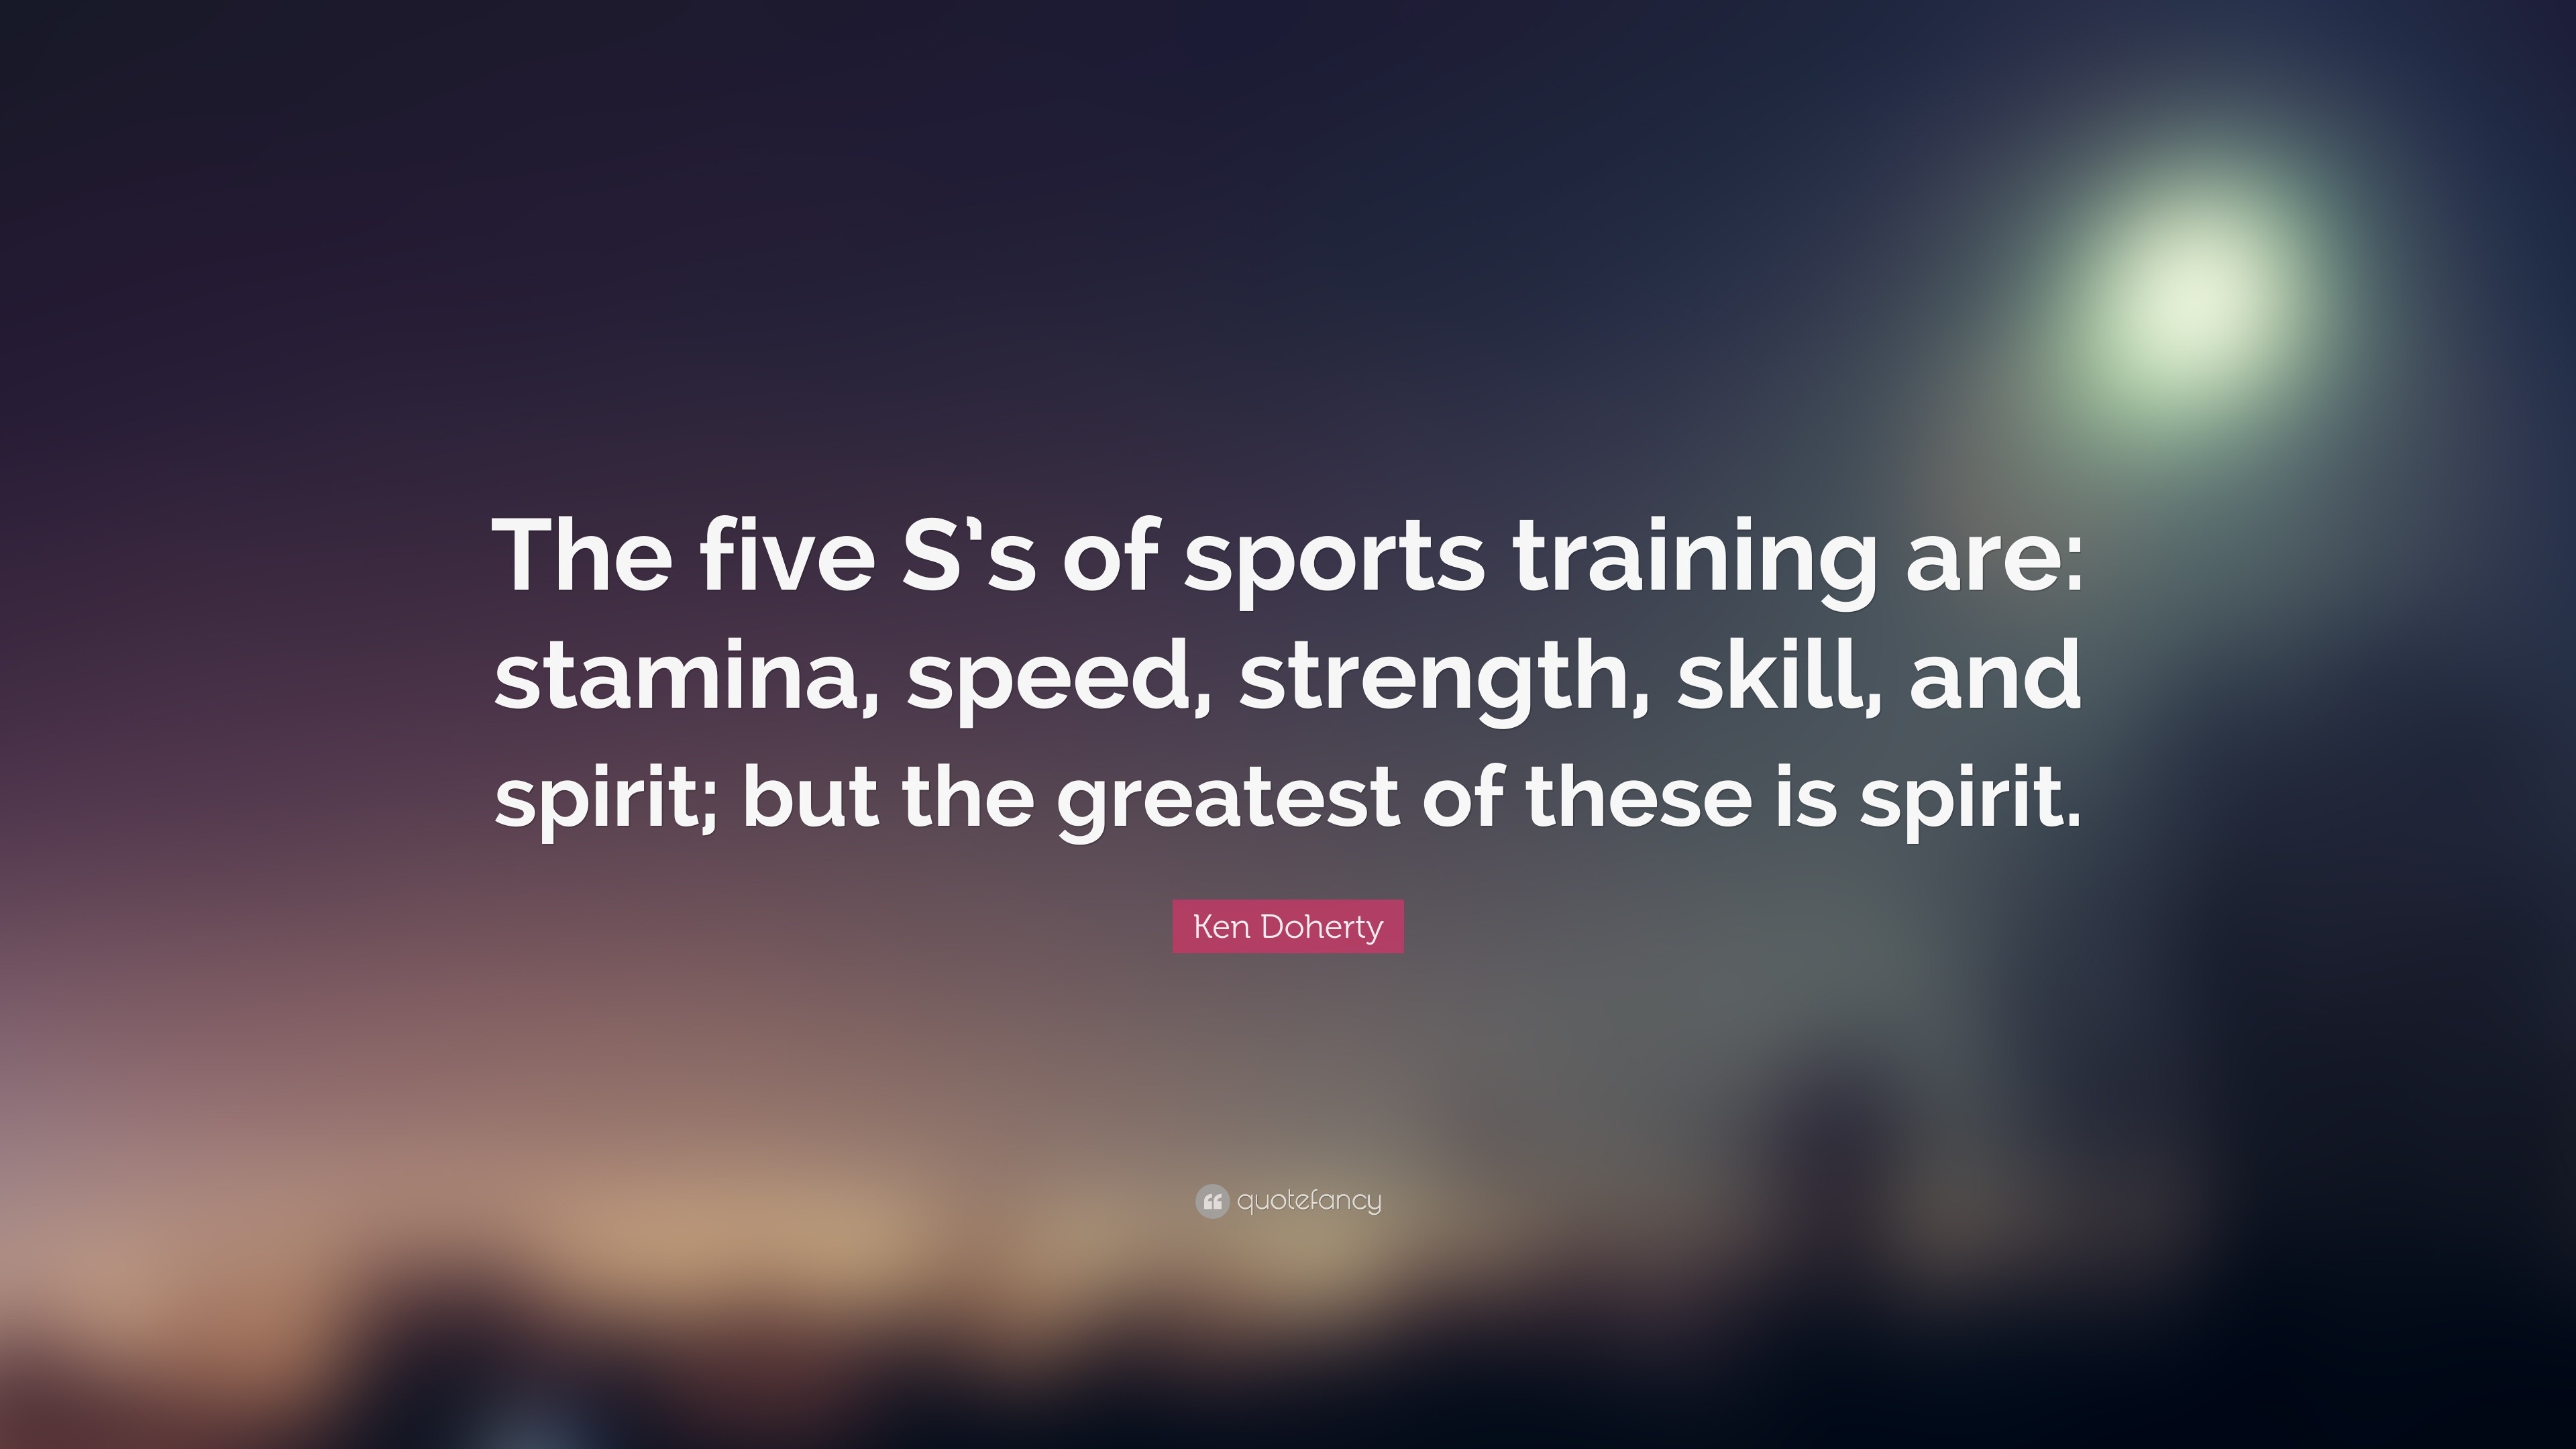 https://quotefancy.com/media/wallpaper/3840x2160/1633108-Ken-Doherty-Quote-The-five-S-s-of-sports-training-are-stamina.jpg